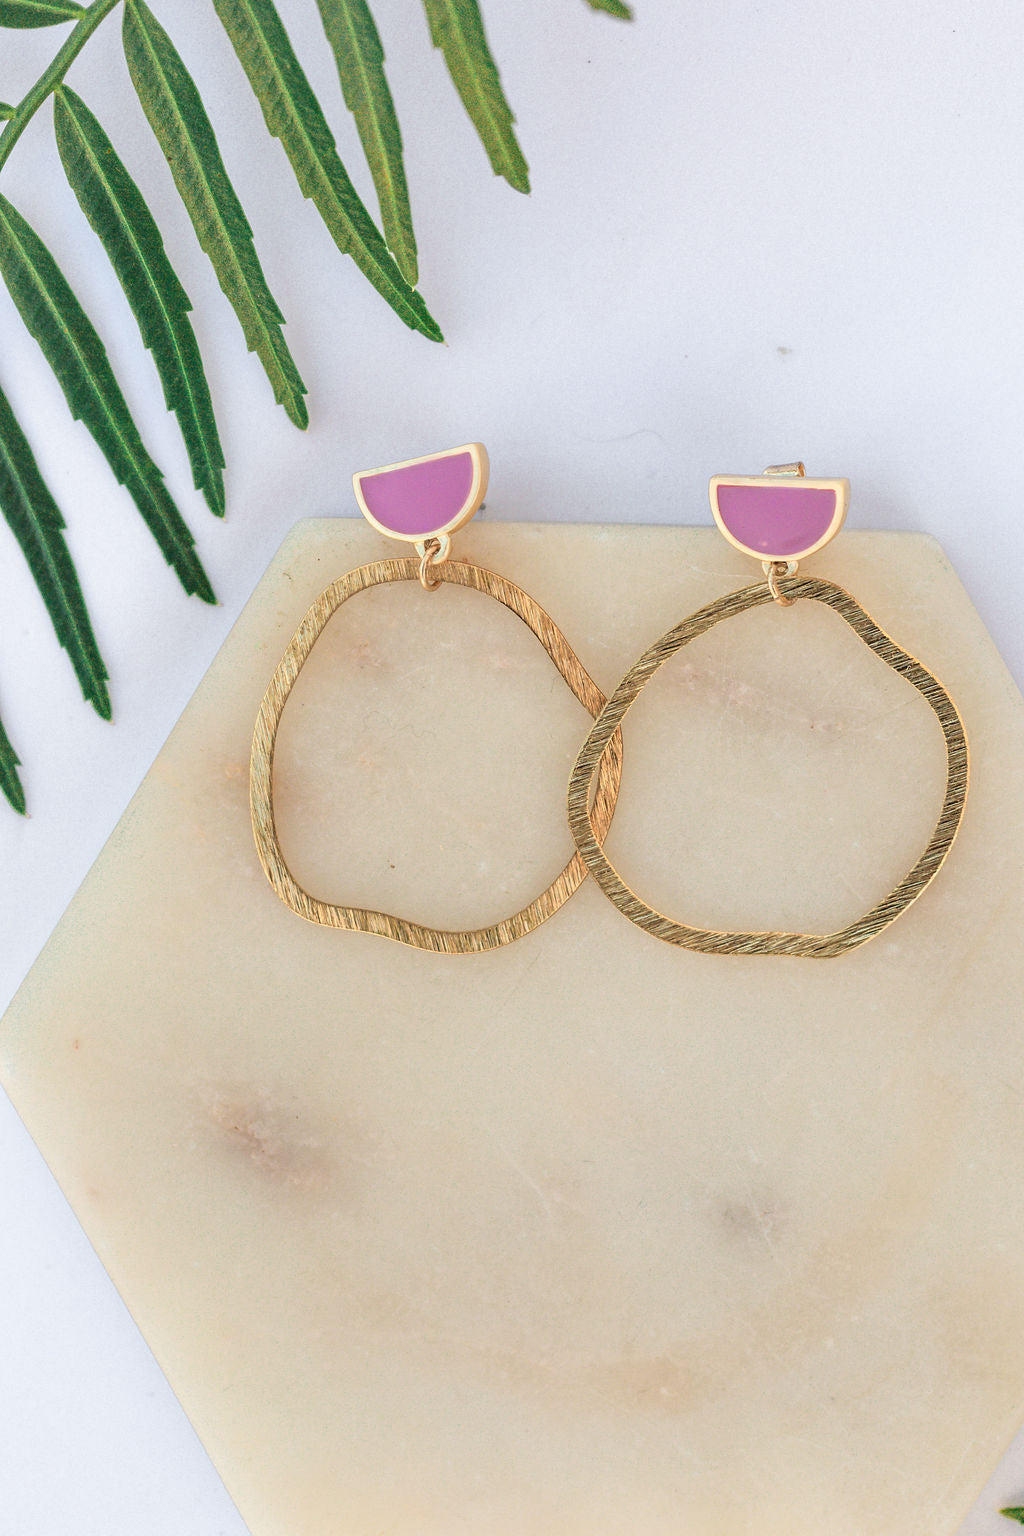 Abstract Hoop Earrings in Gold and Pink